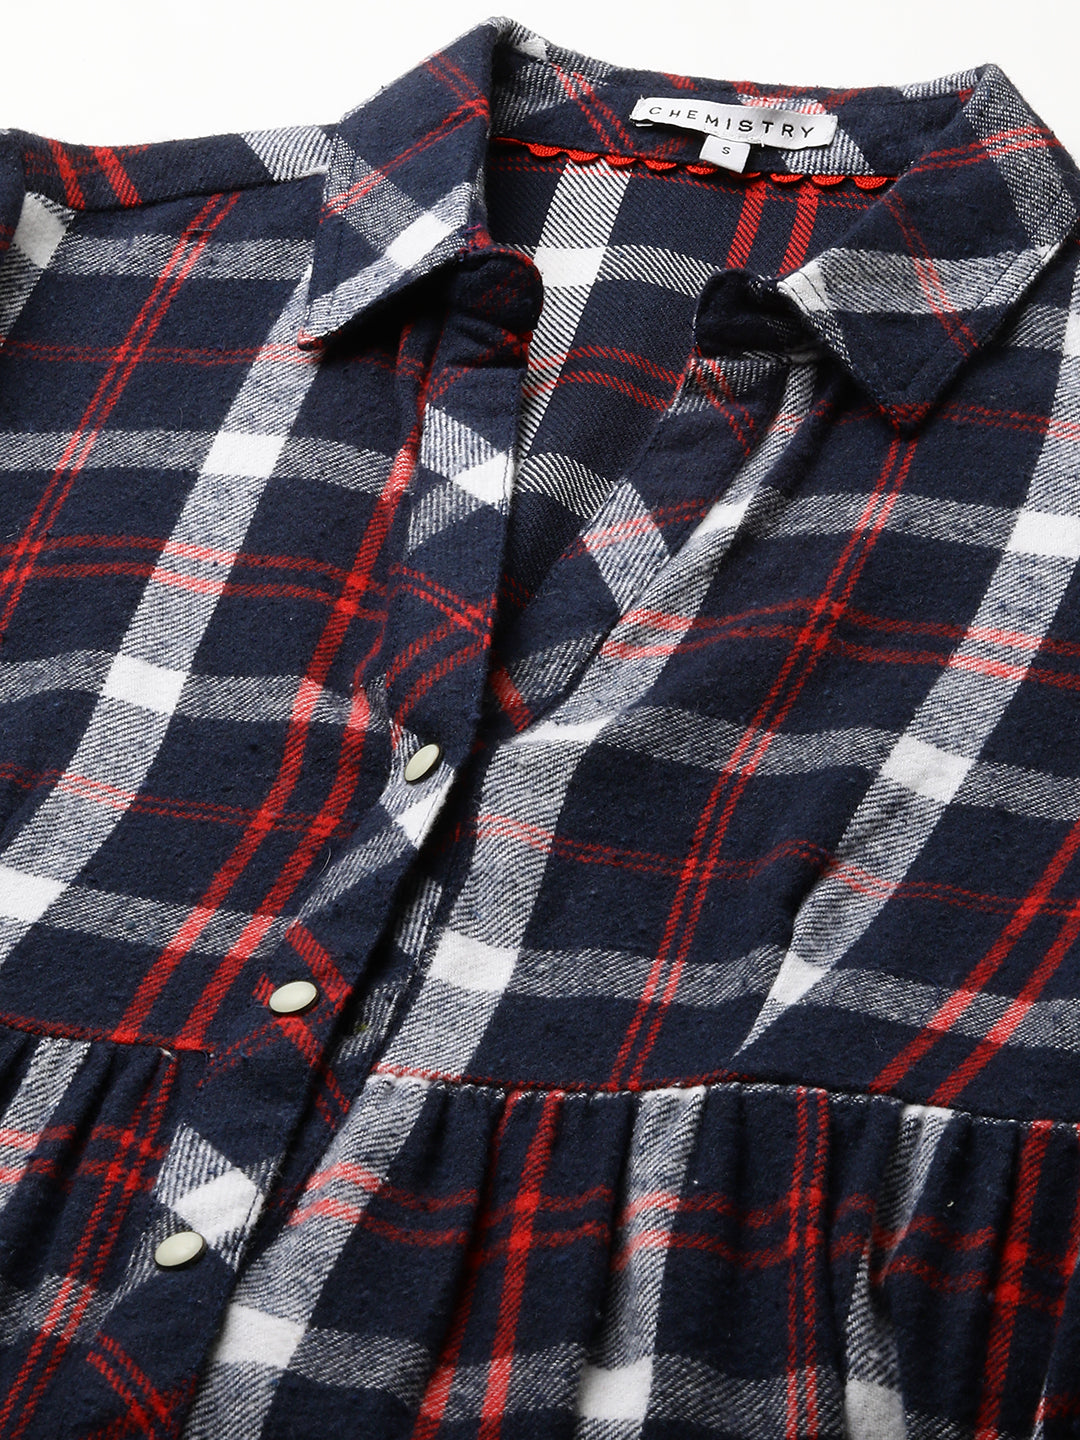 Brushed Flannel Waisted Shirt Dress